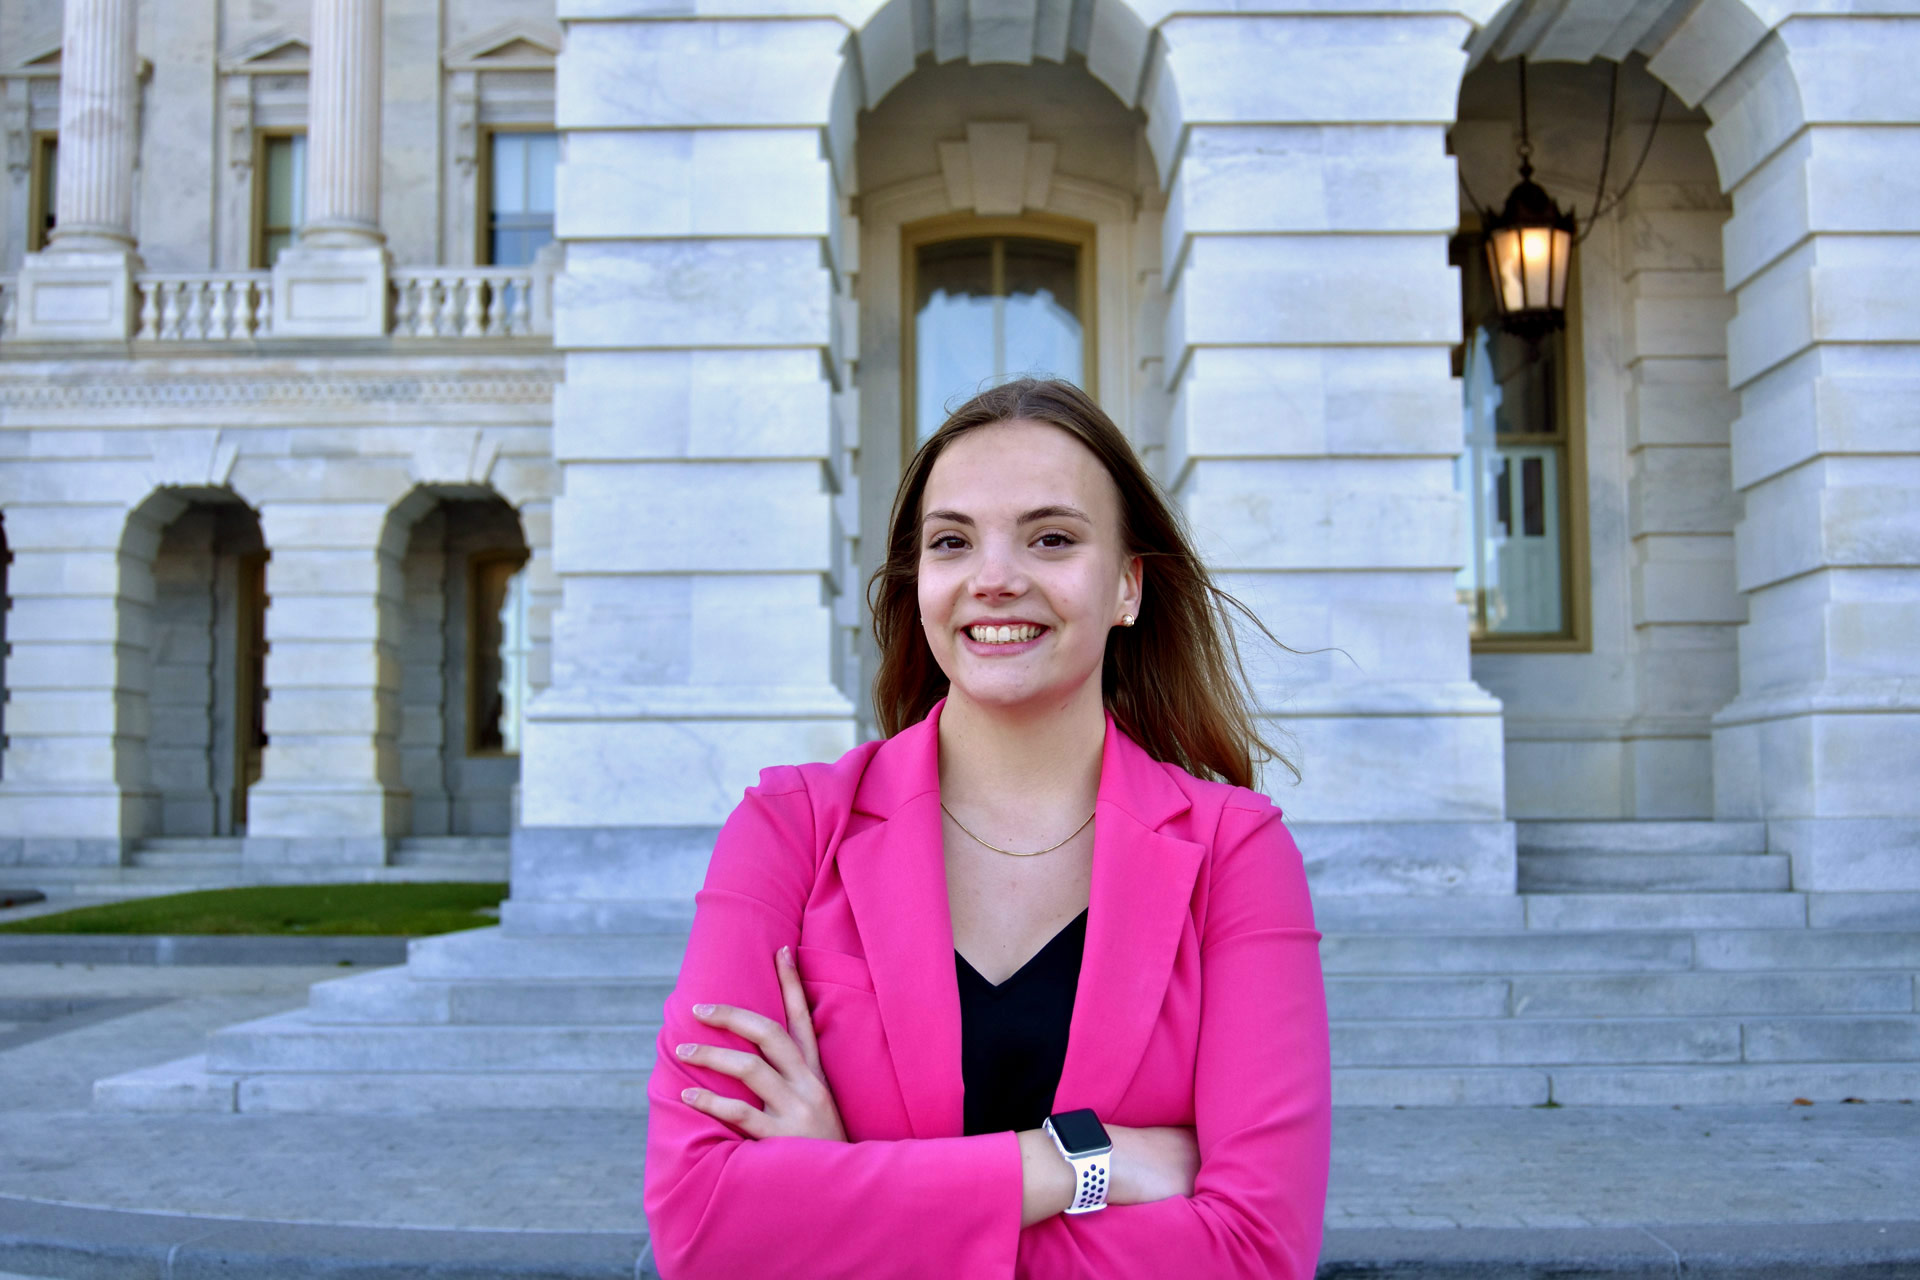 Nancy Hoogwerf, a student at Grand Valley State University interning for Congresswoman Hillary Scholten's office.